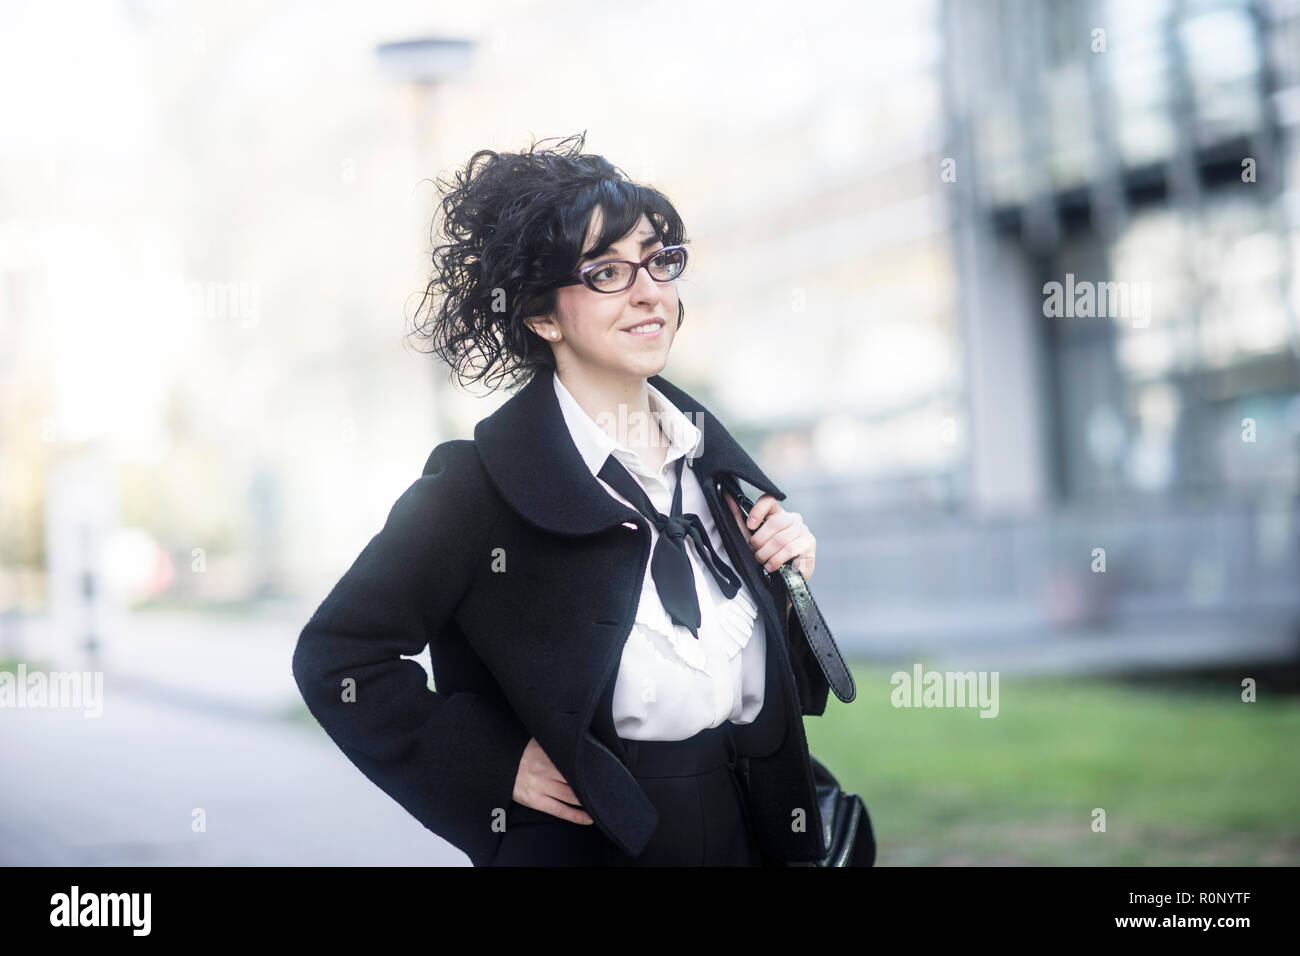 Portrait of a woman standing outdoors with her hand on her hip, Germany Stock Photo